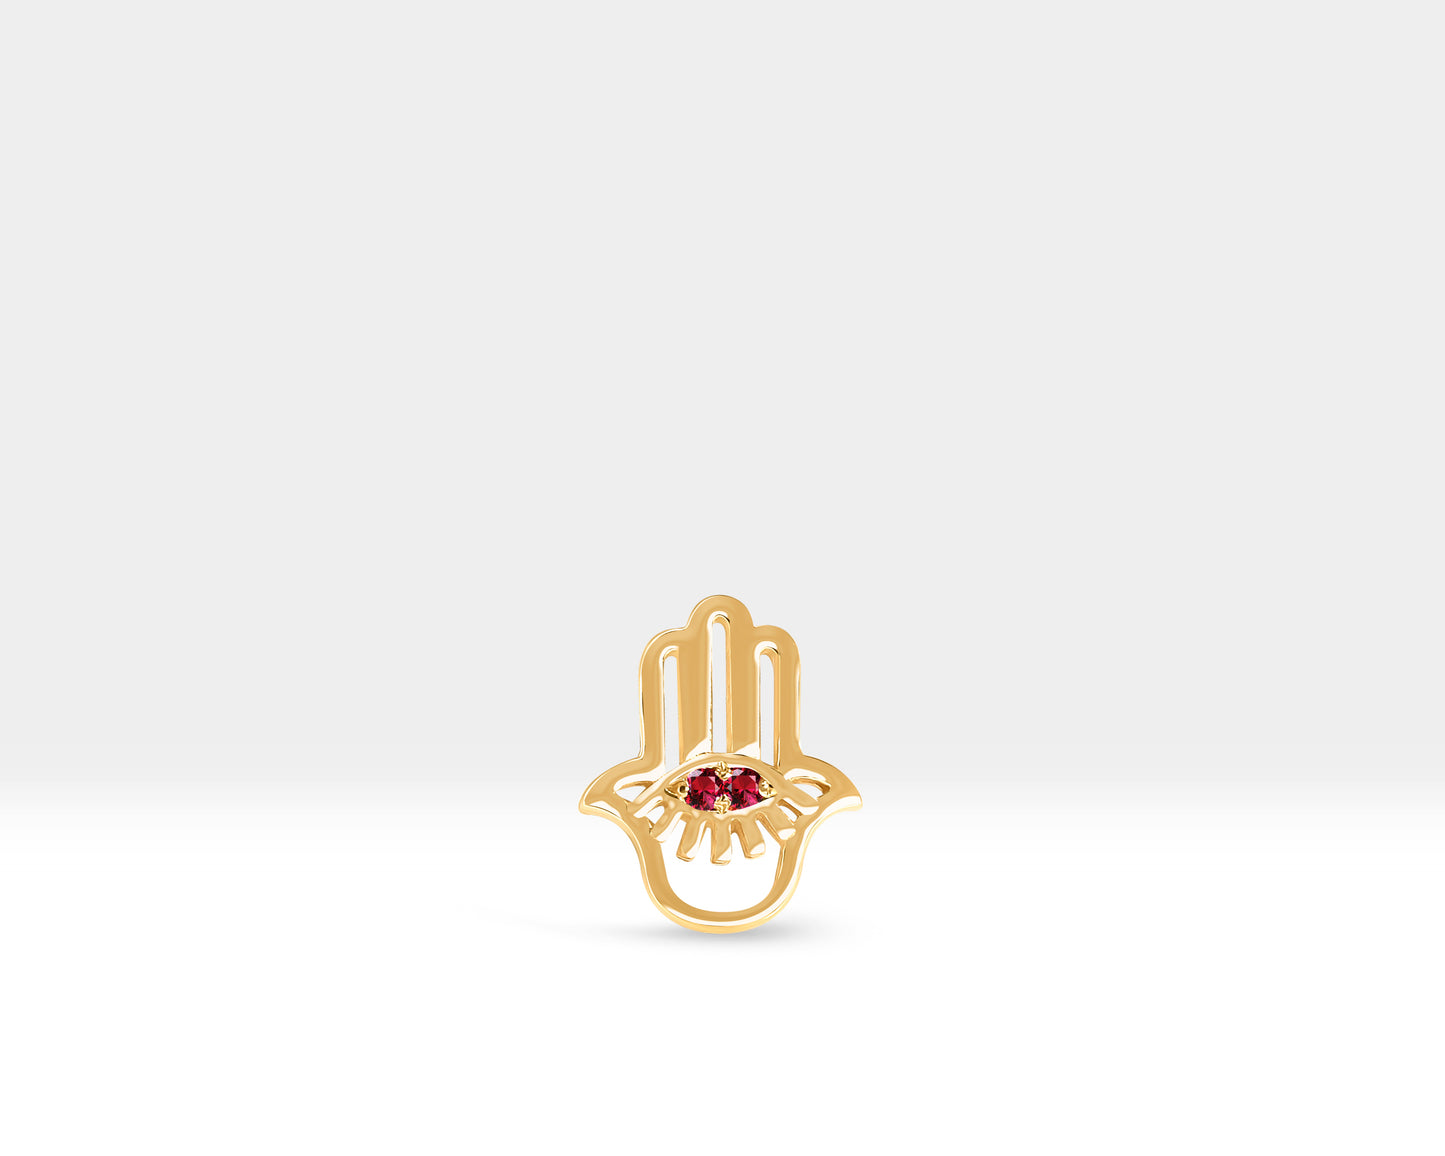 Cartilage Piercing,Hand of Fatima Design Piercing ,Ruby Piercing,14K Yellow Solid Gold